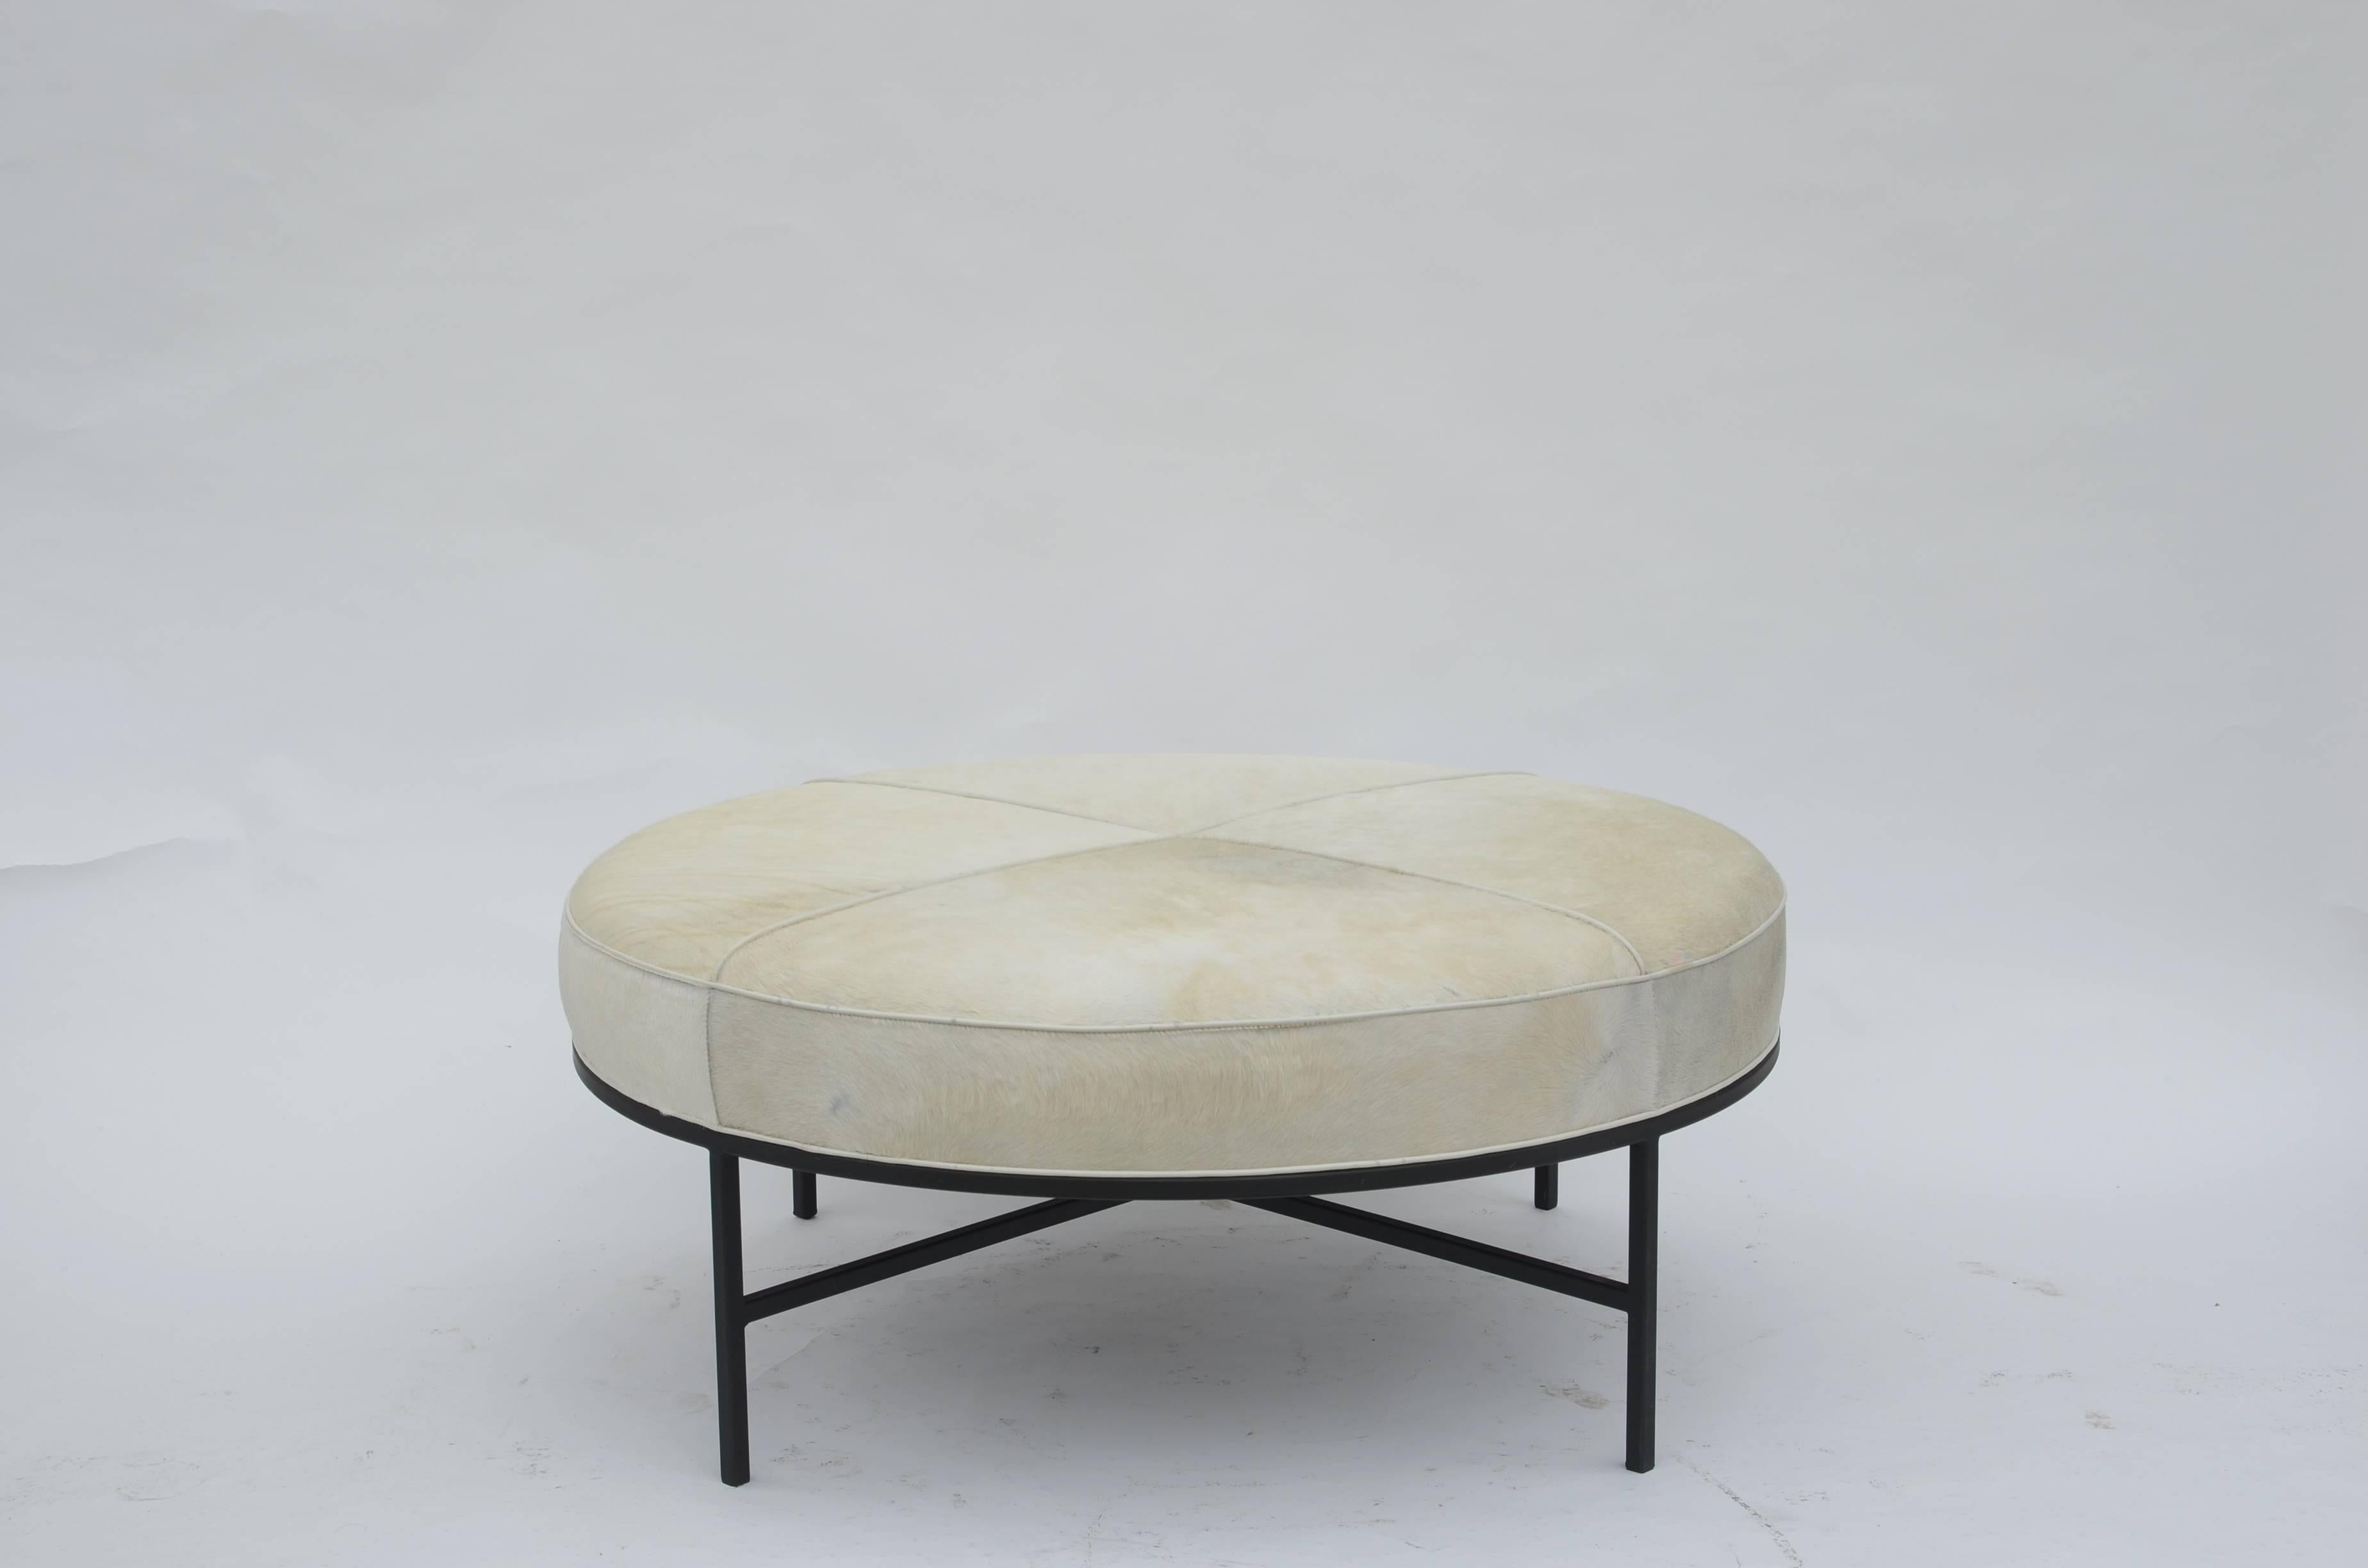 The Tambour ottoman is a welcome change from the traditional coffee table. This inviting, versatile piece can be used to sit, relax, but also as a regular coffee table: Just add a large platter for drinks and you're ready to go. It is upholstered